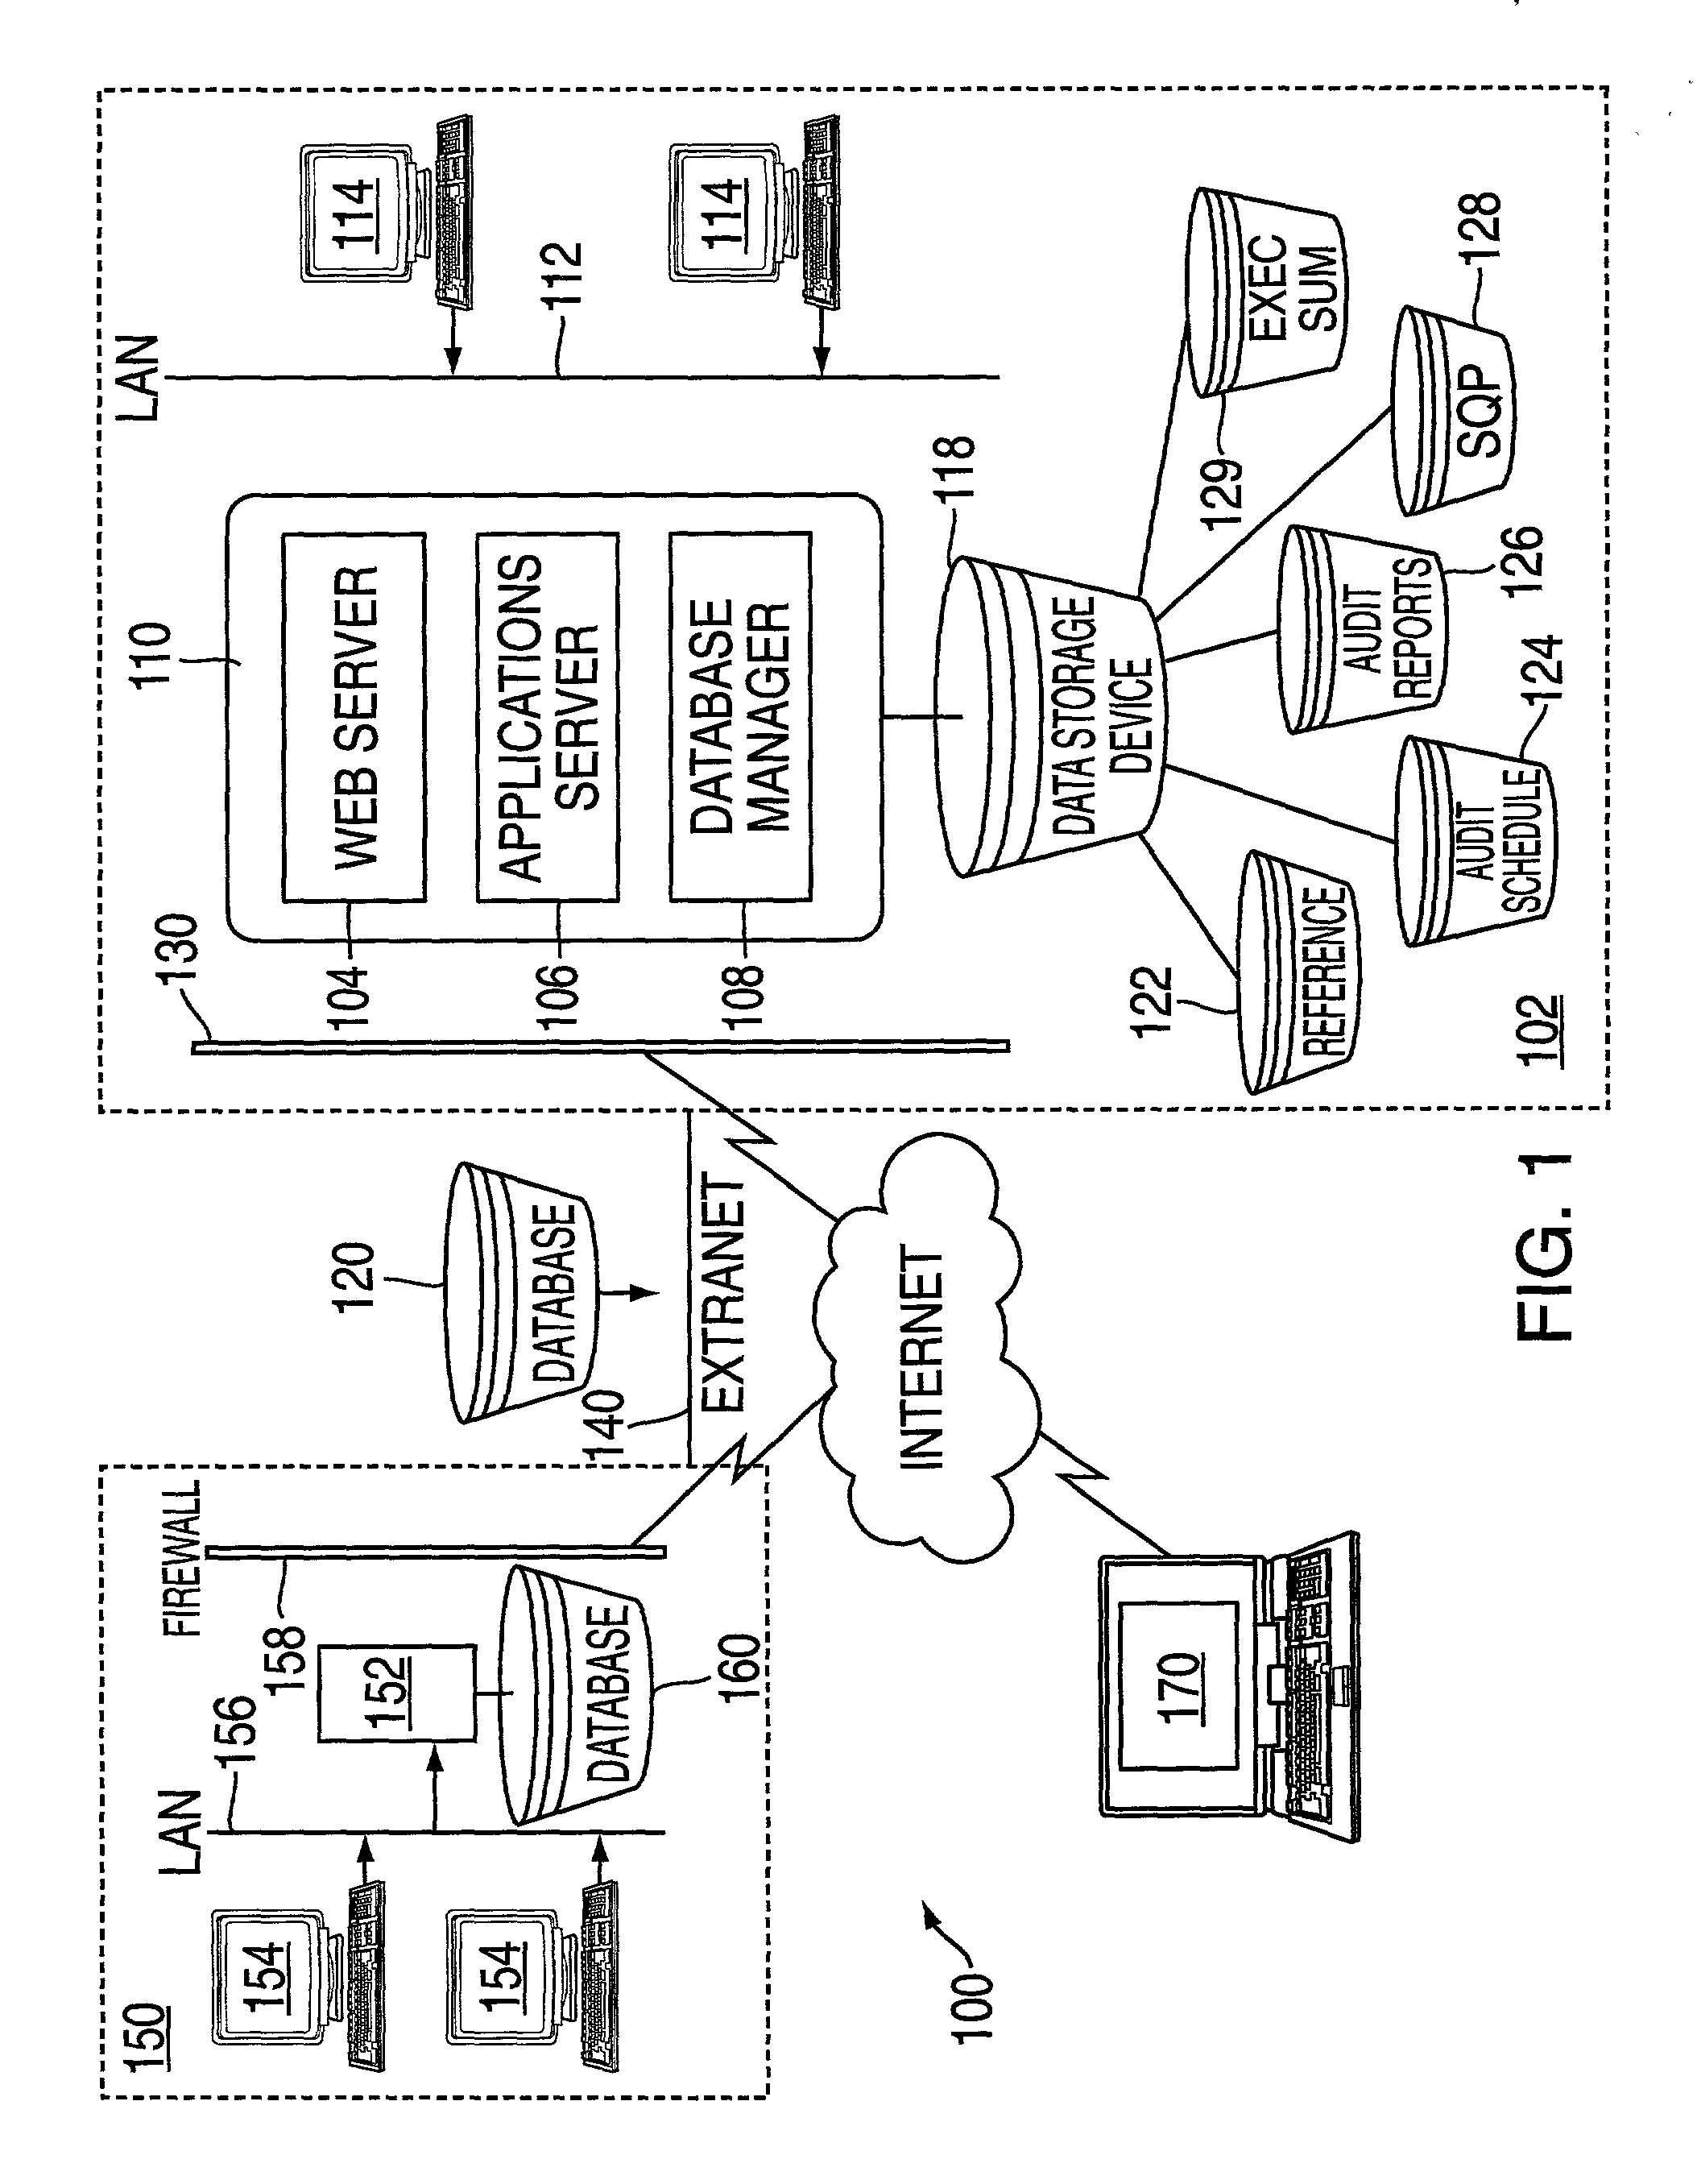 Method and system for gathering and disseminating quality performance and audit activity data in an extended enterprise environment